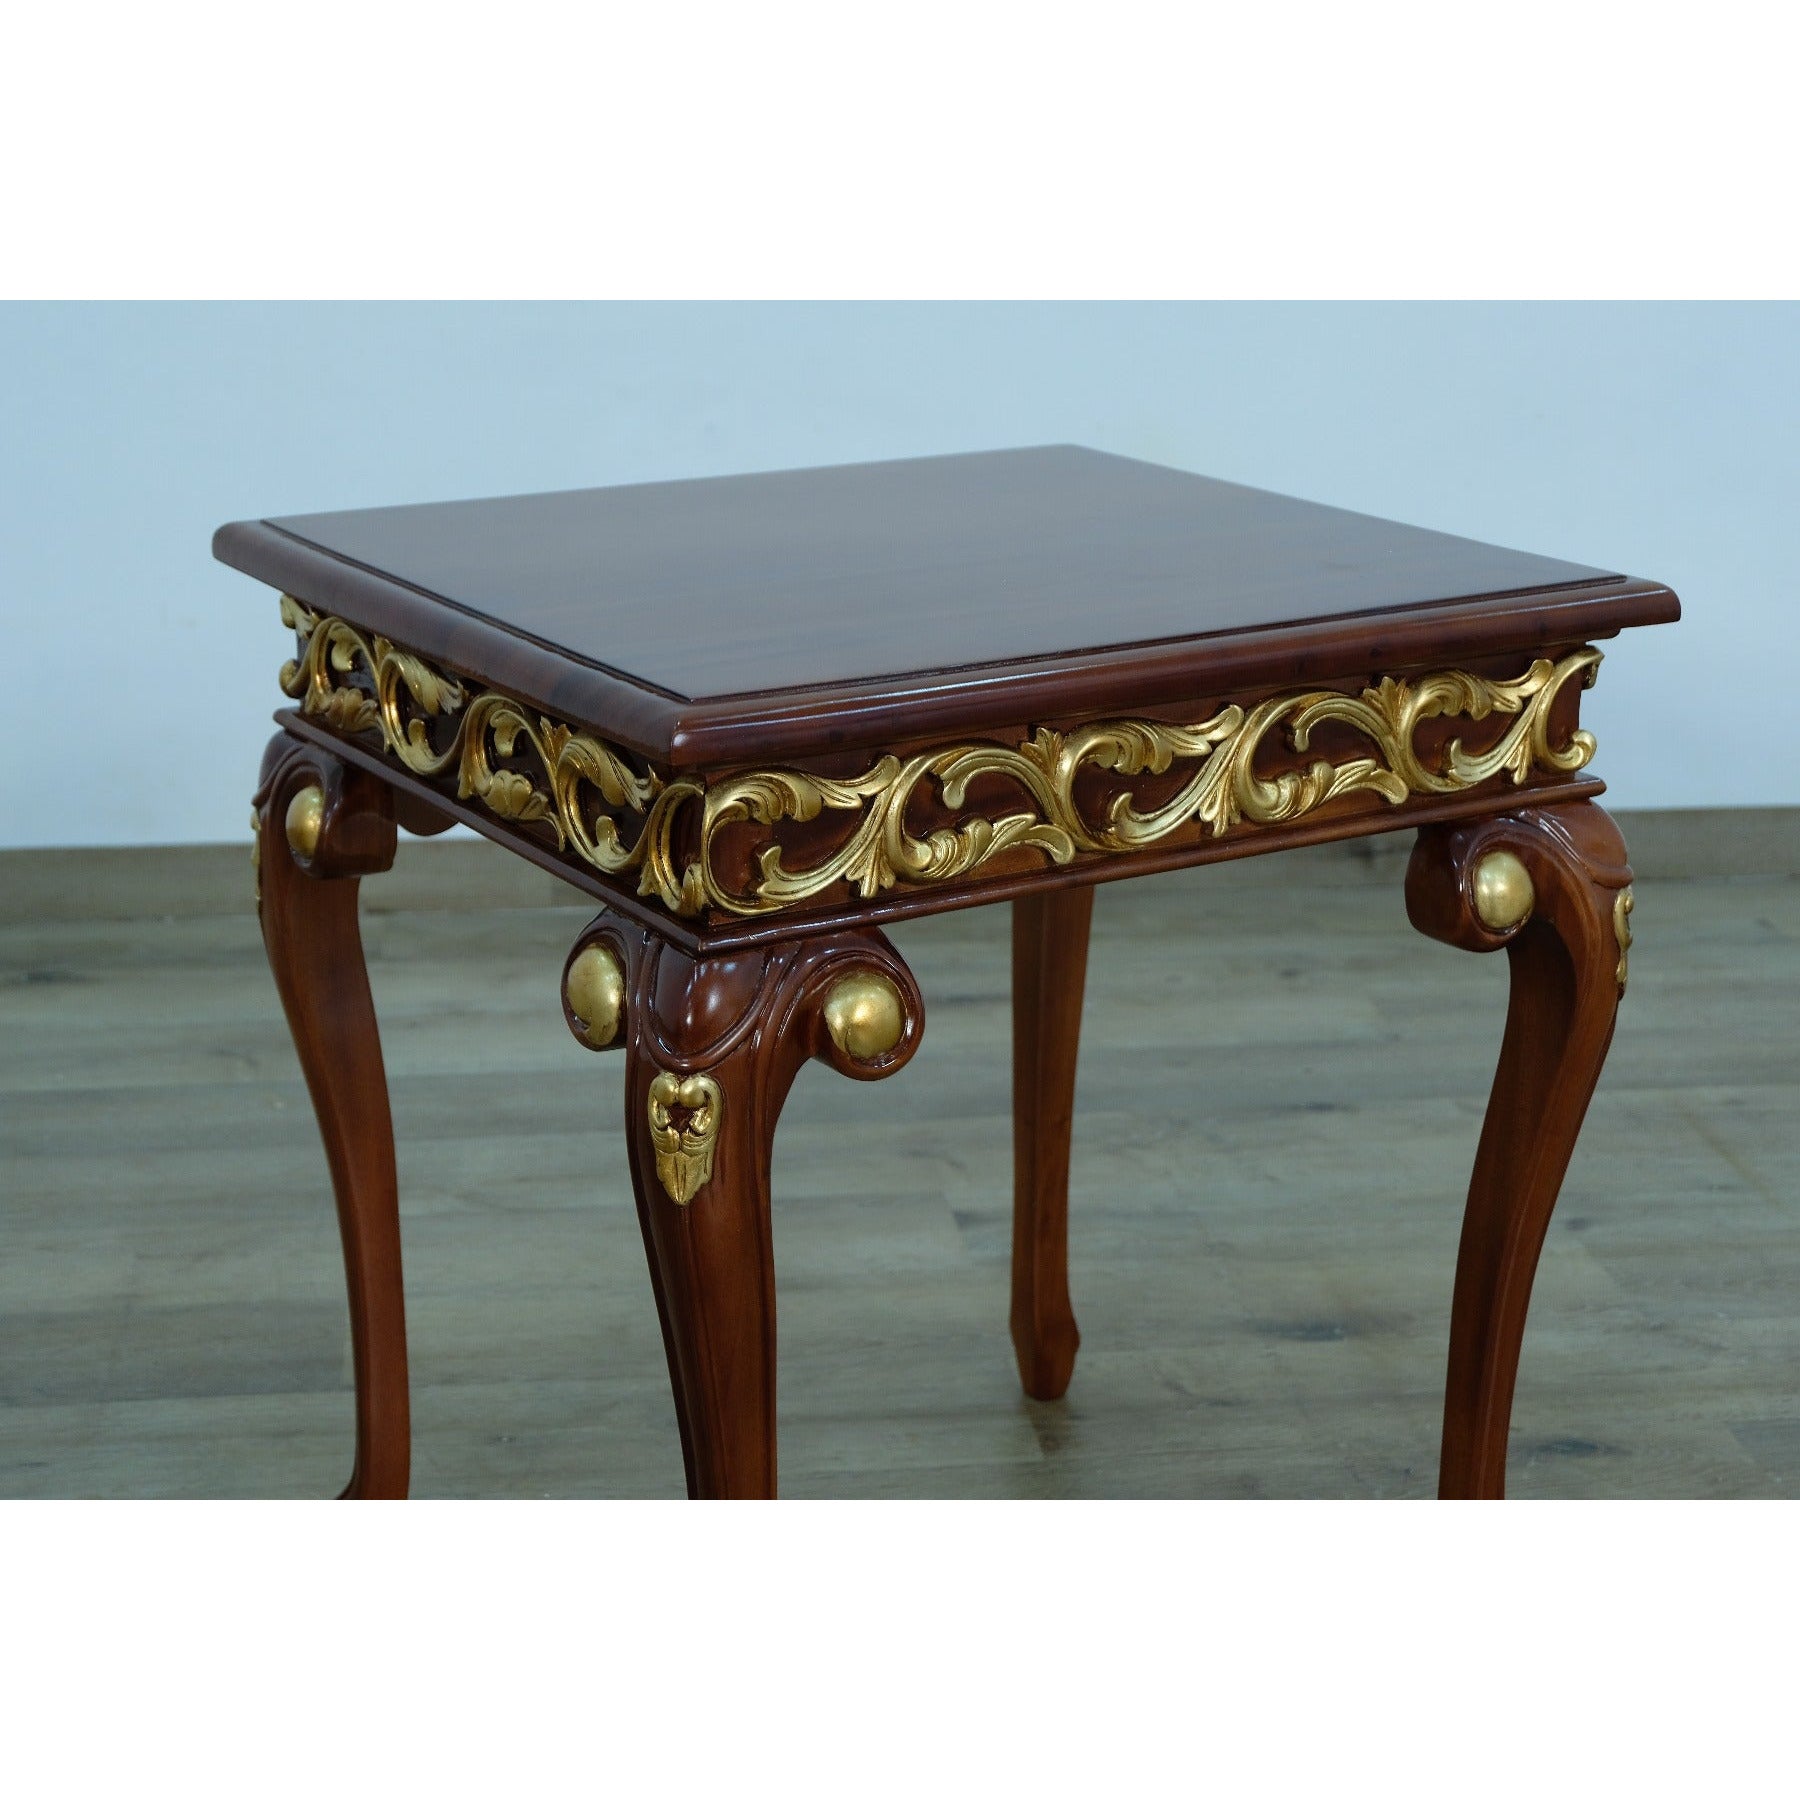 European Furniture - Fantasia II Side Table in Gold-Brown - 40019-ET - New Star Living